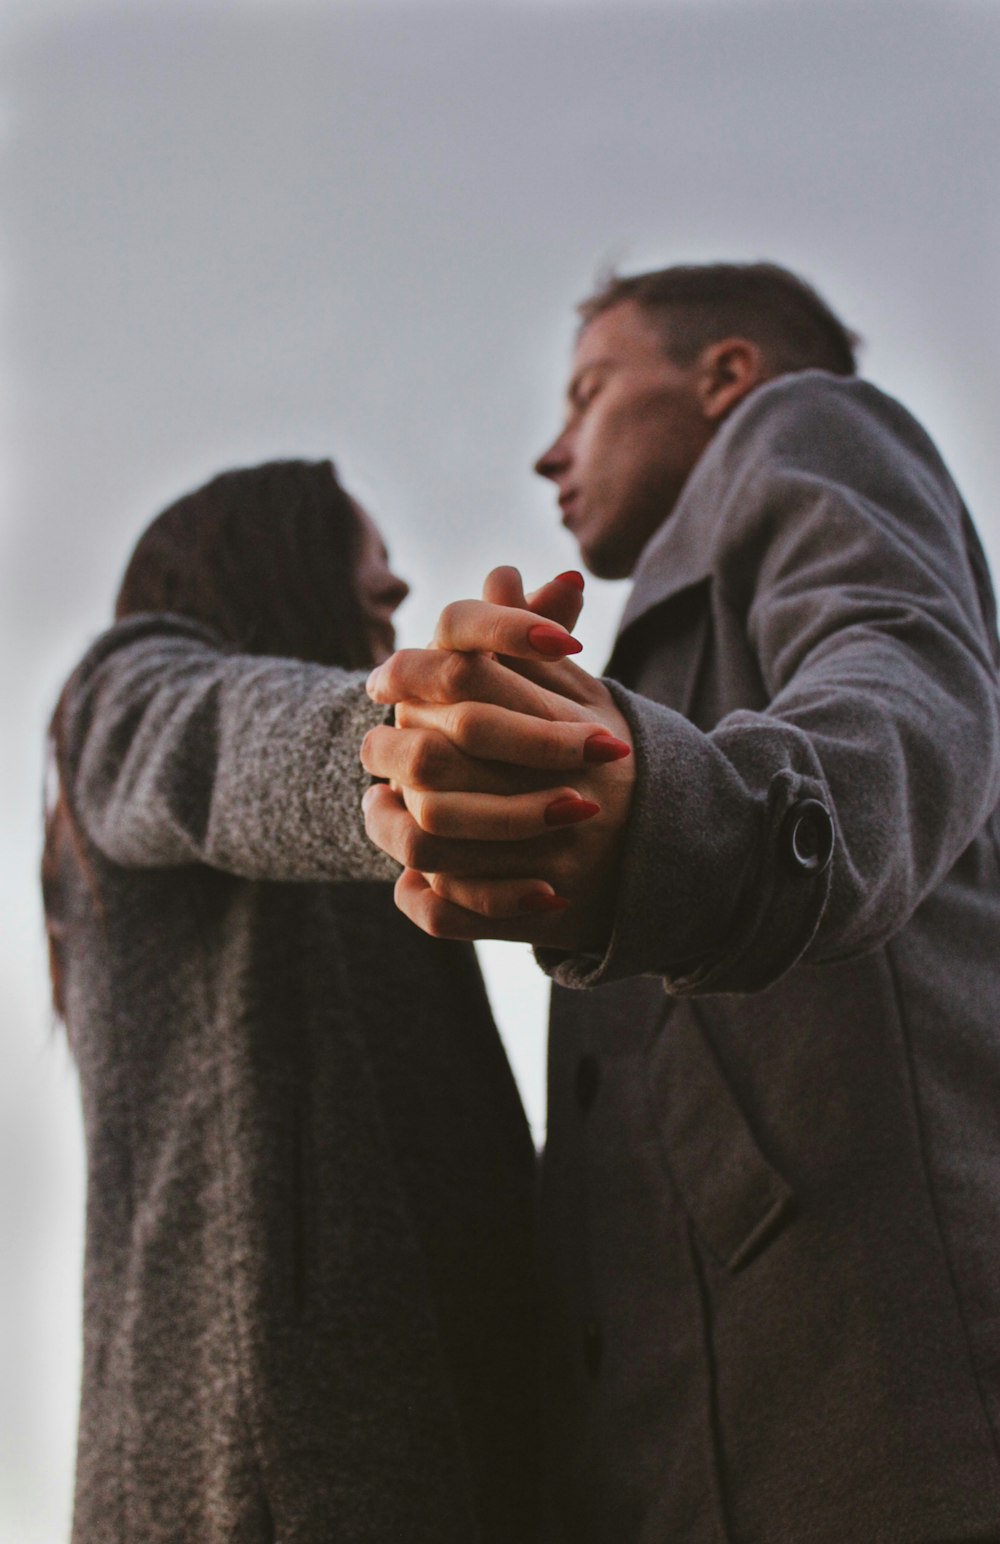 man in black coat holding hands of woman in gray sweater